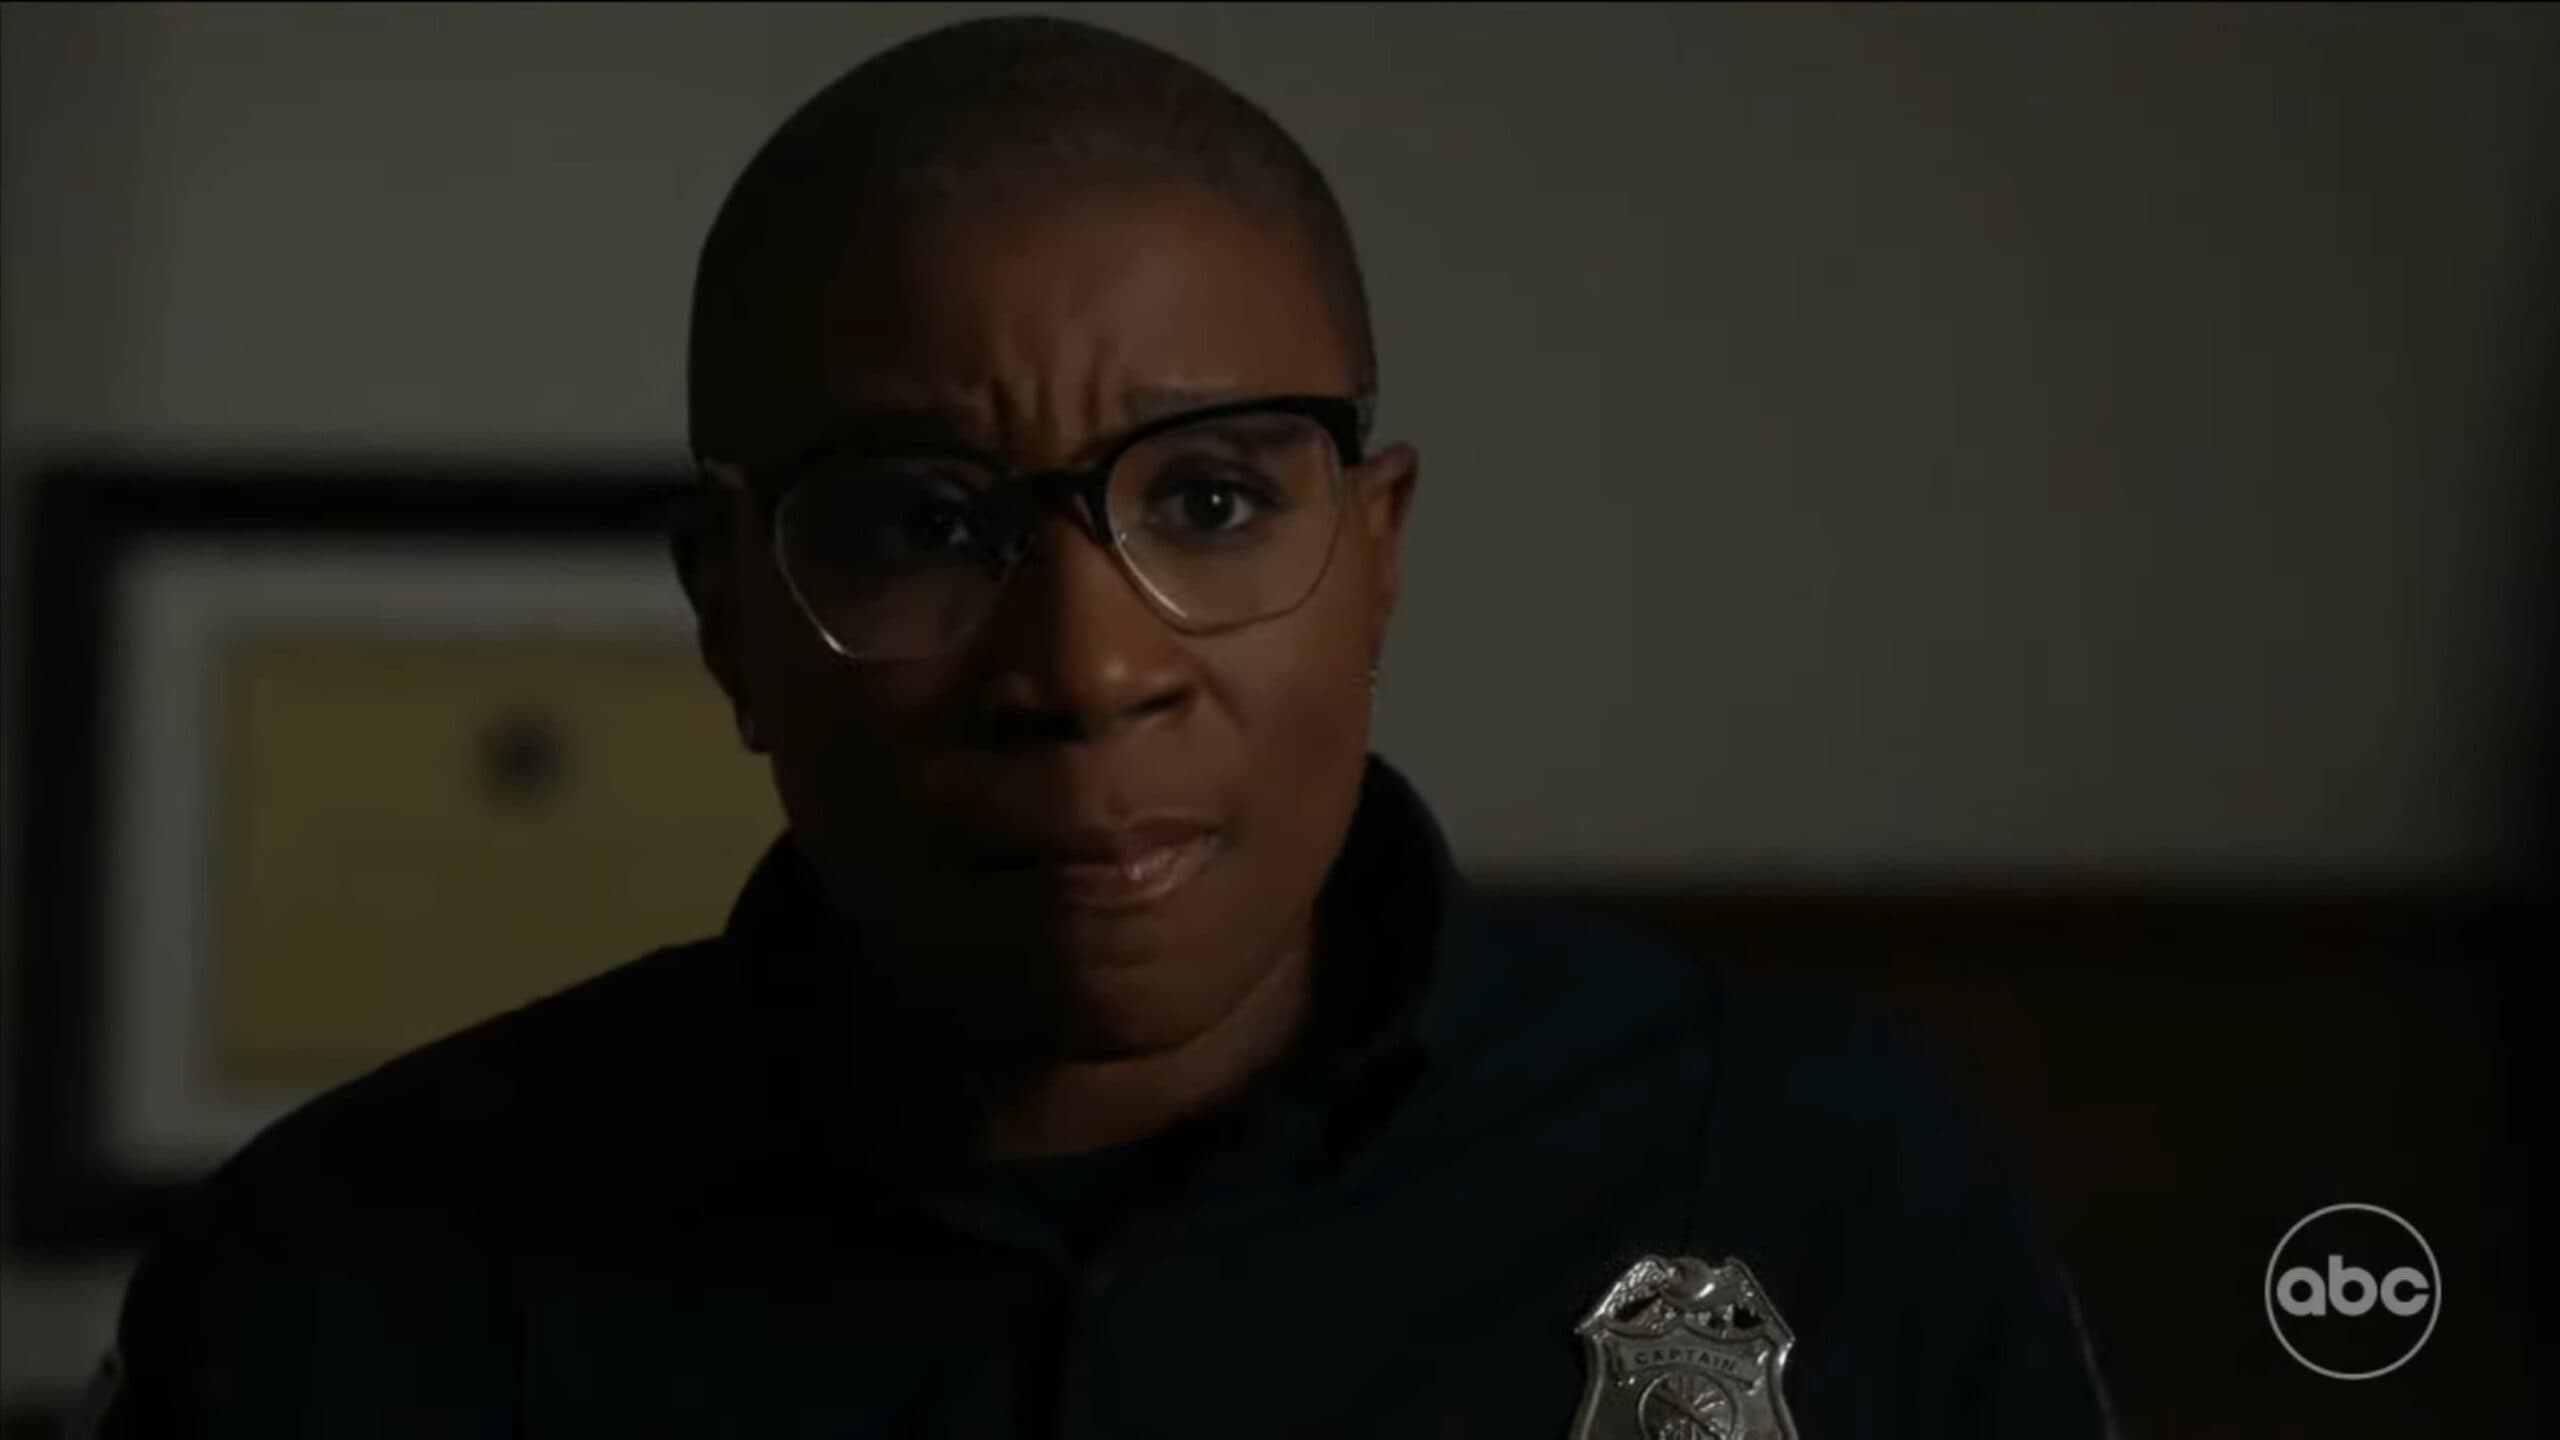 Aisha Hinds as Hen being told there is going to be an investigation into how she handled a 911 call